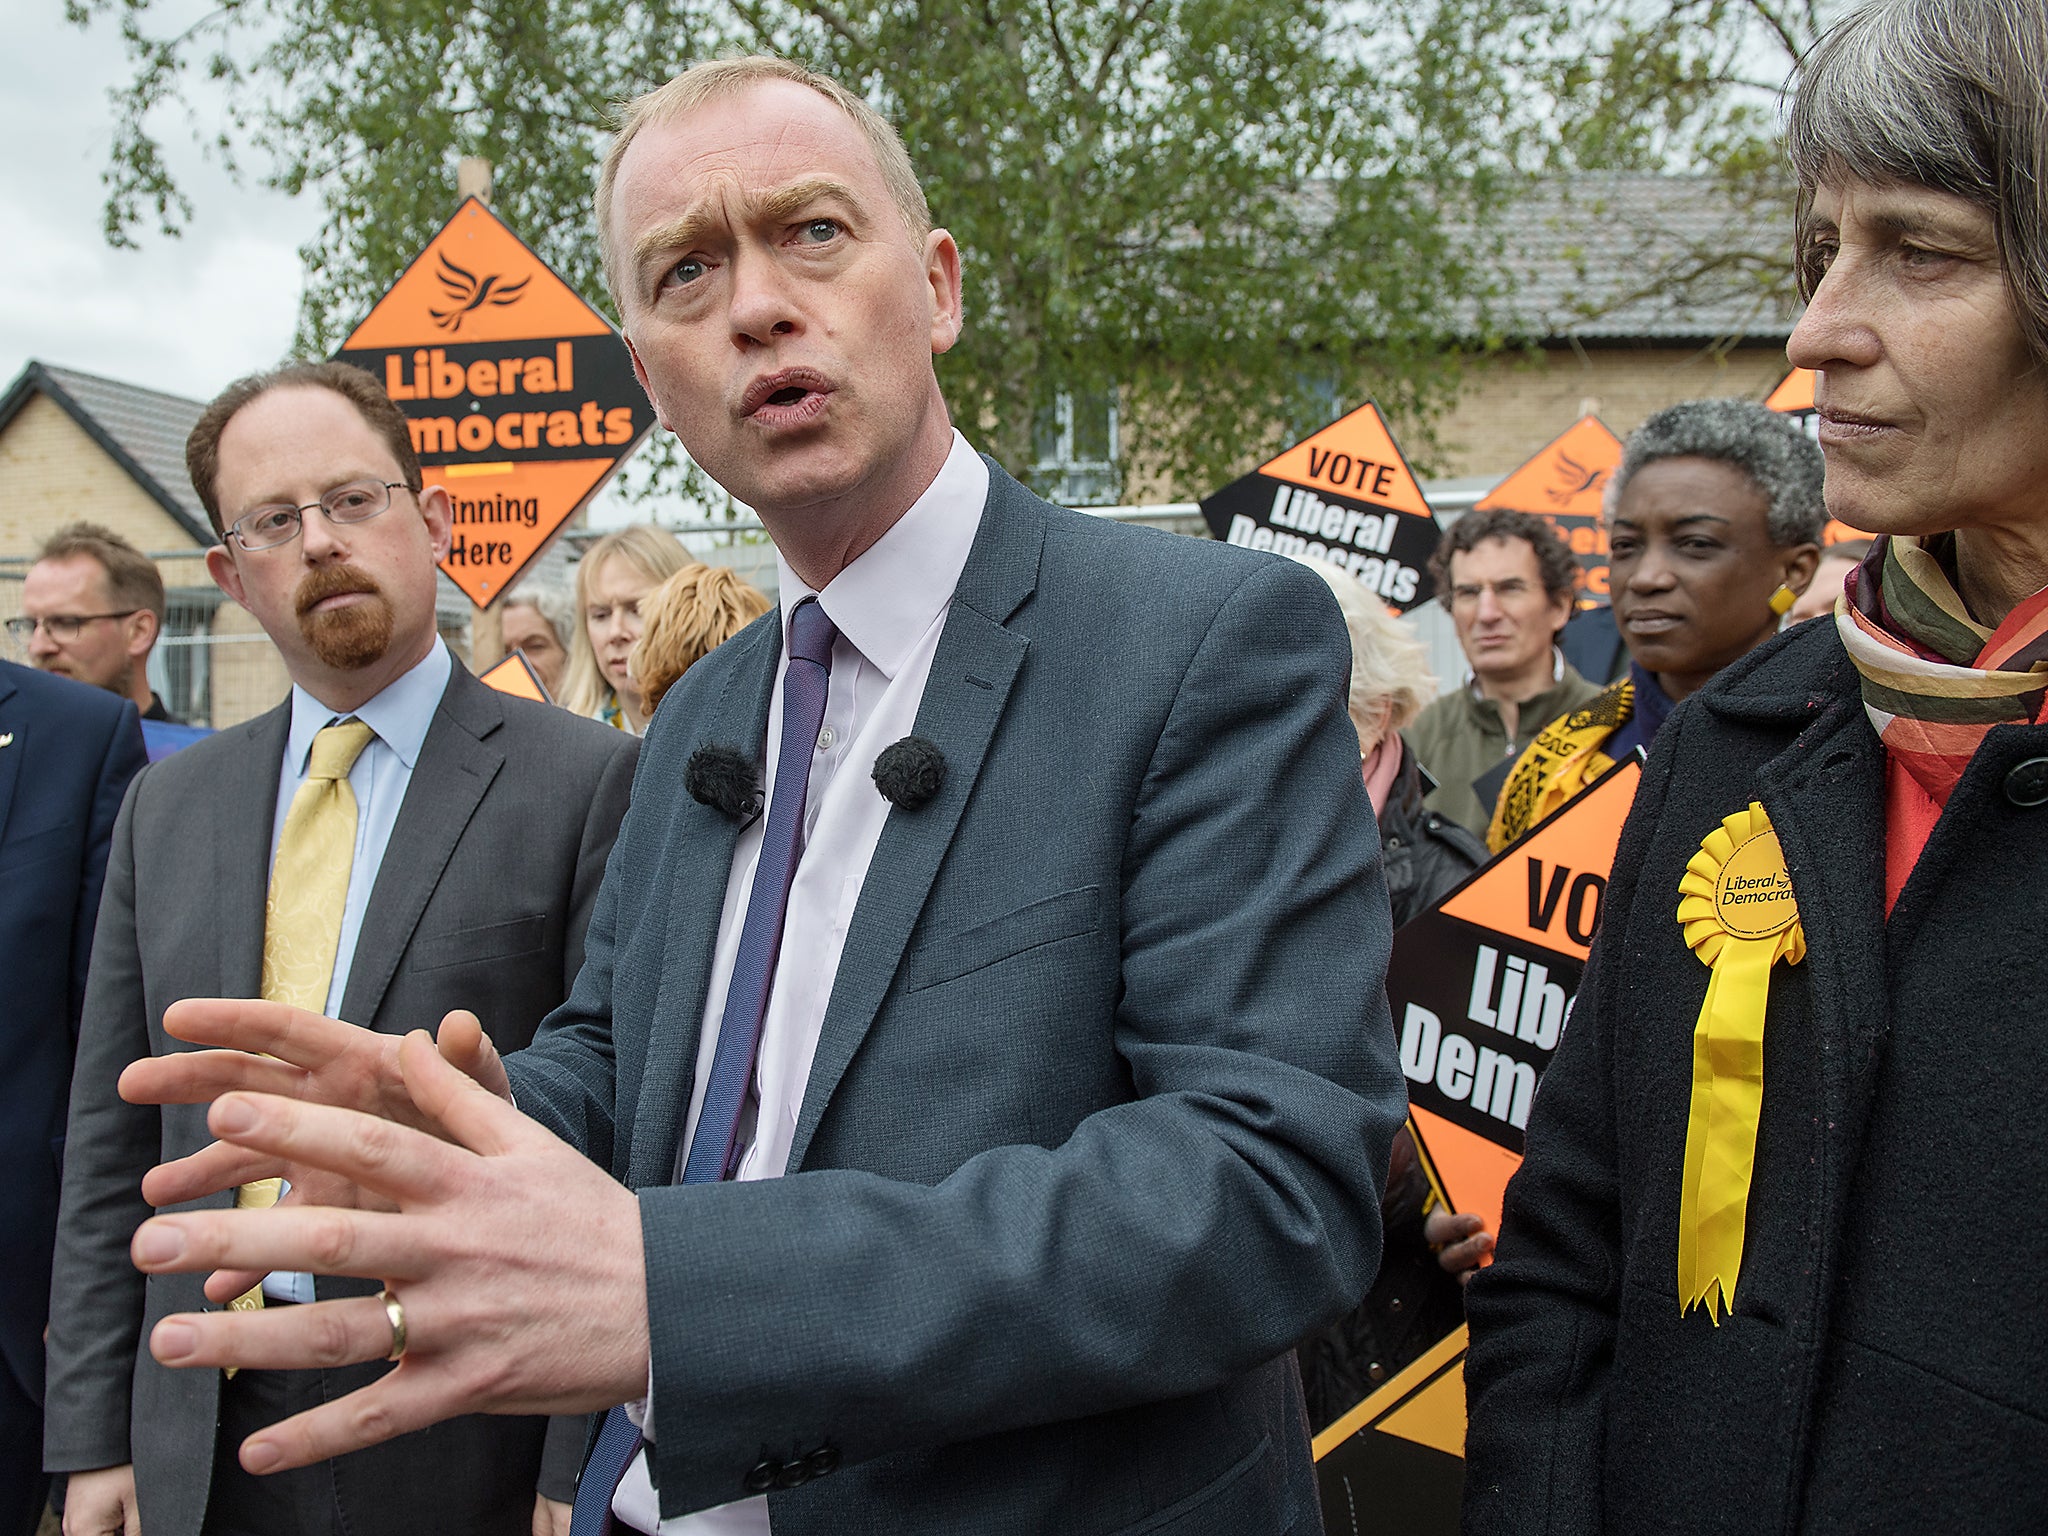 Tim Farron accused Theresa May of not caring about the NHS